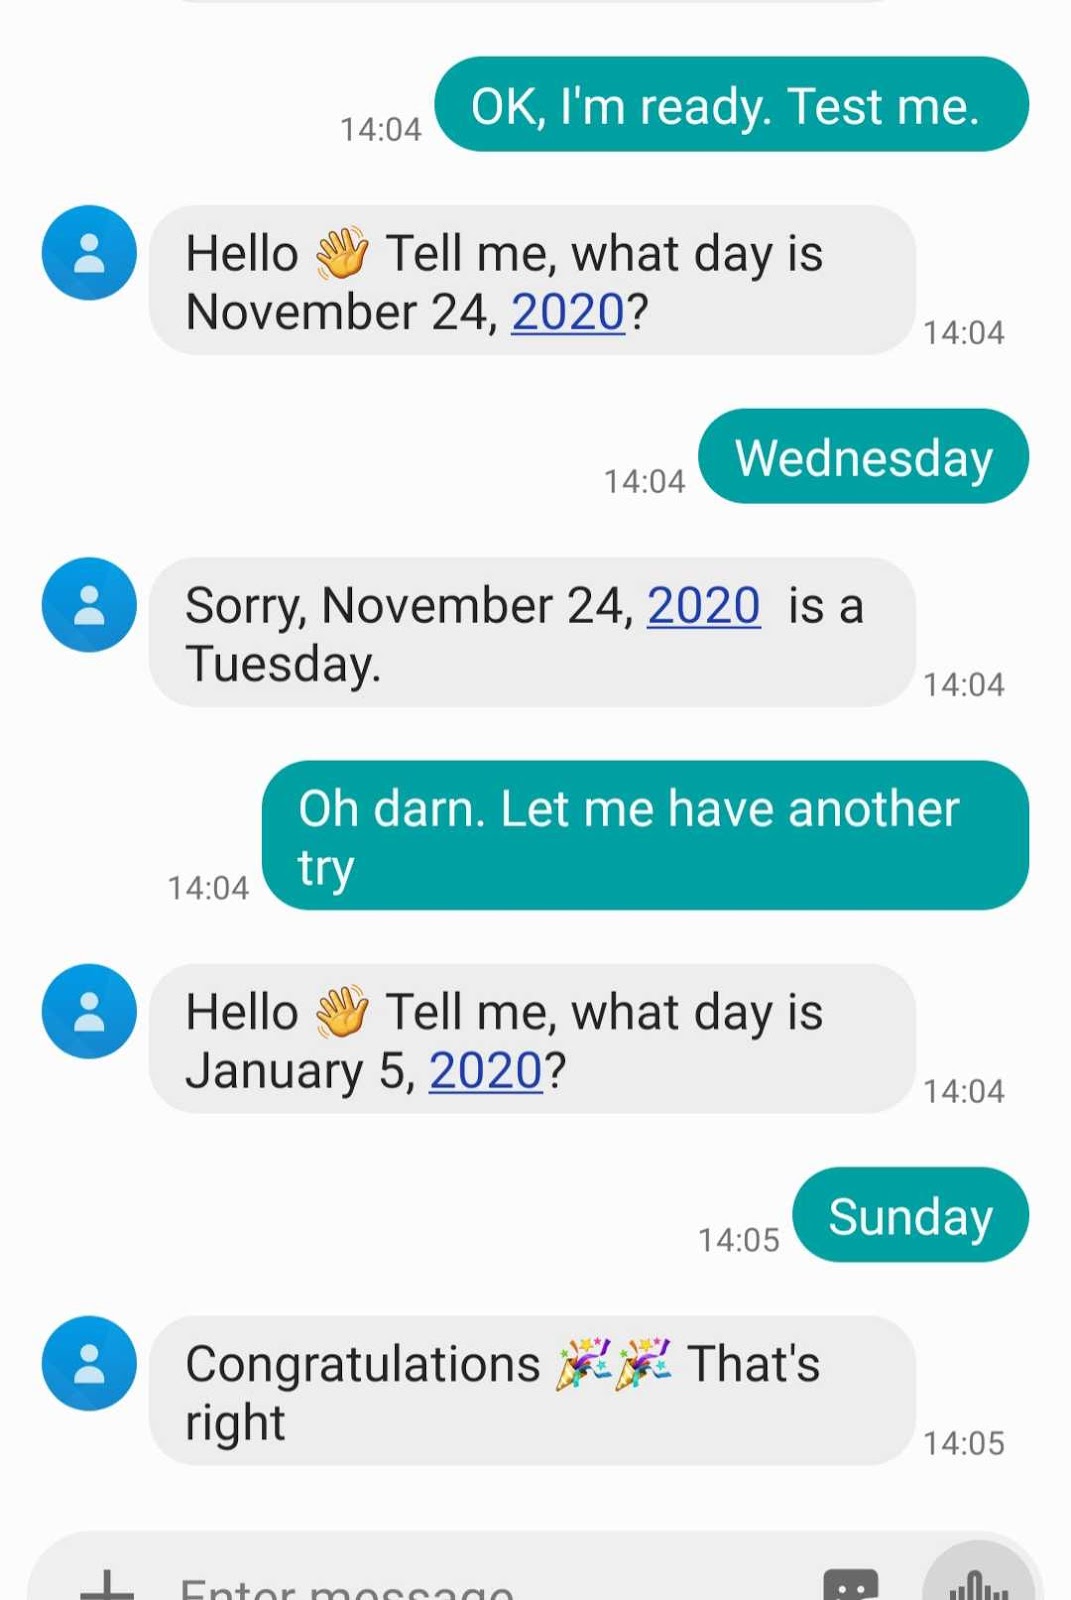 Screenshot of an SMS conversation with one wrong answer and one correct answer.